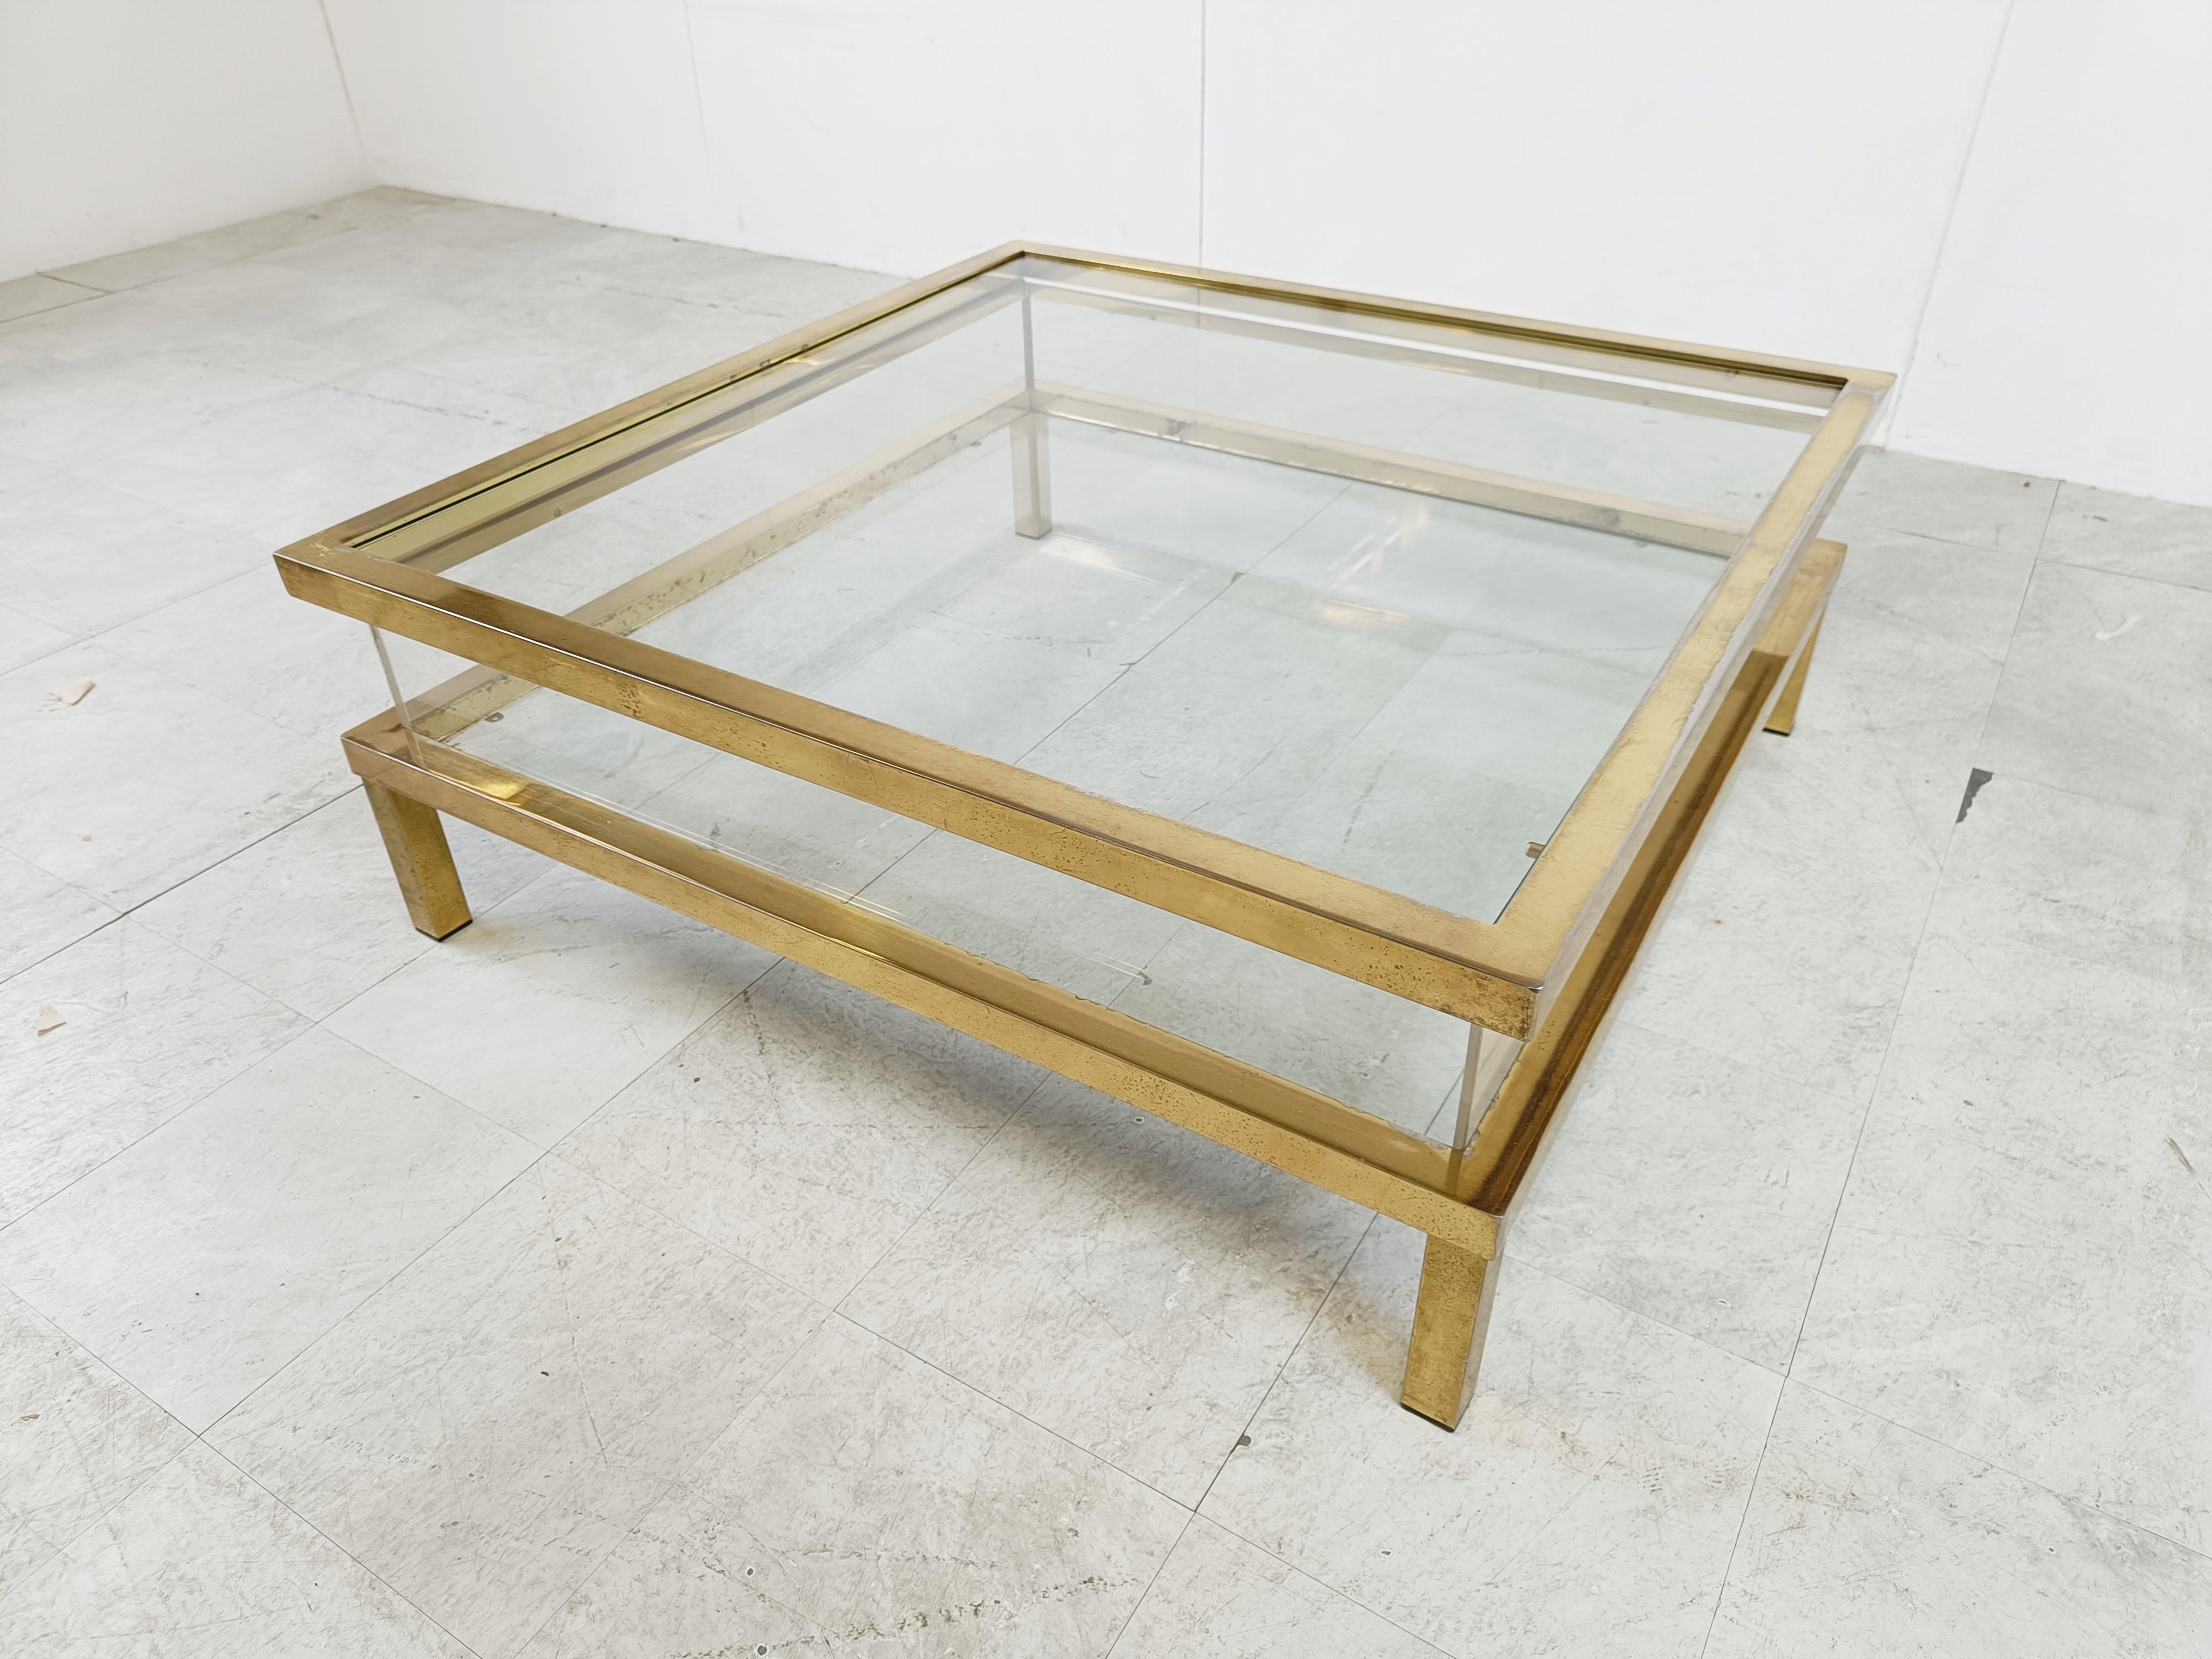 Vintage display coffee table with a sliding glass top.

This luxurious coffee table is made from brass, glass and plexi

It is ideal to display curio and store magazines.

Good condition with normal age related wear

1970s -